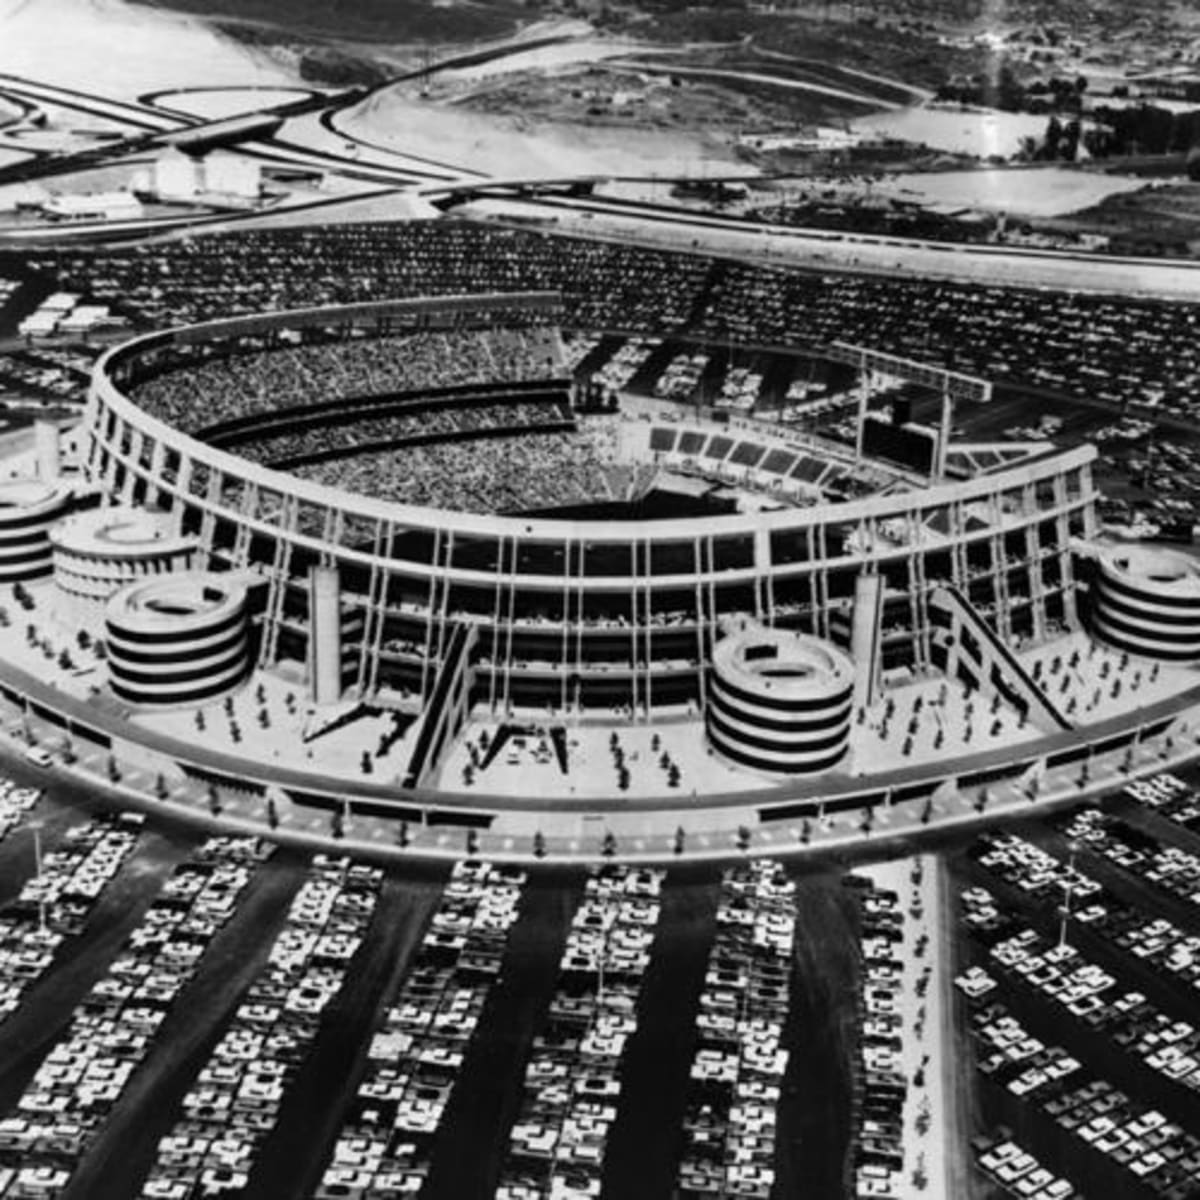 San Diego wanted a floating stadium 50 years ago - Sports Illustrated